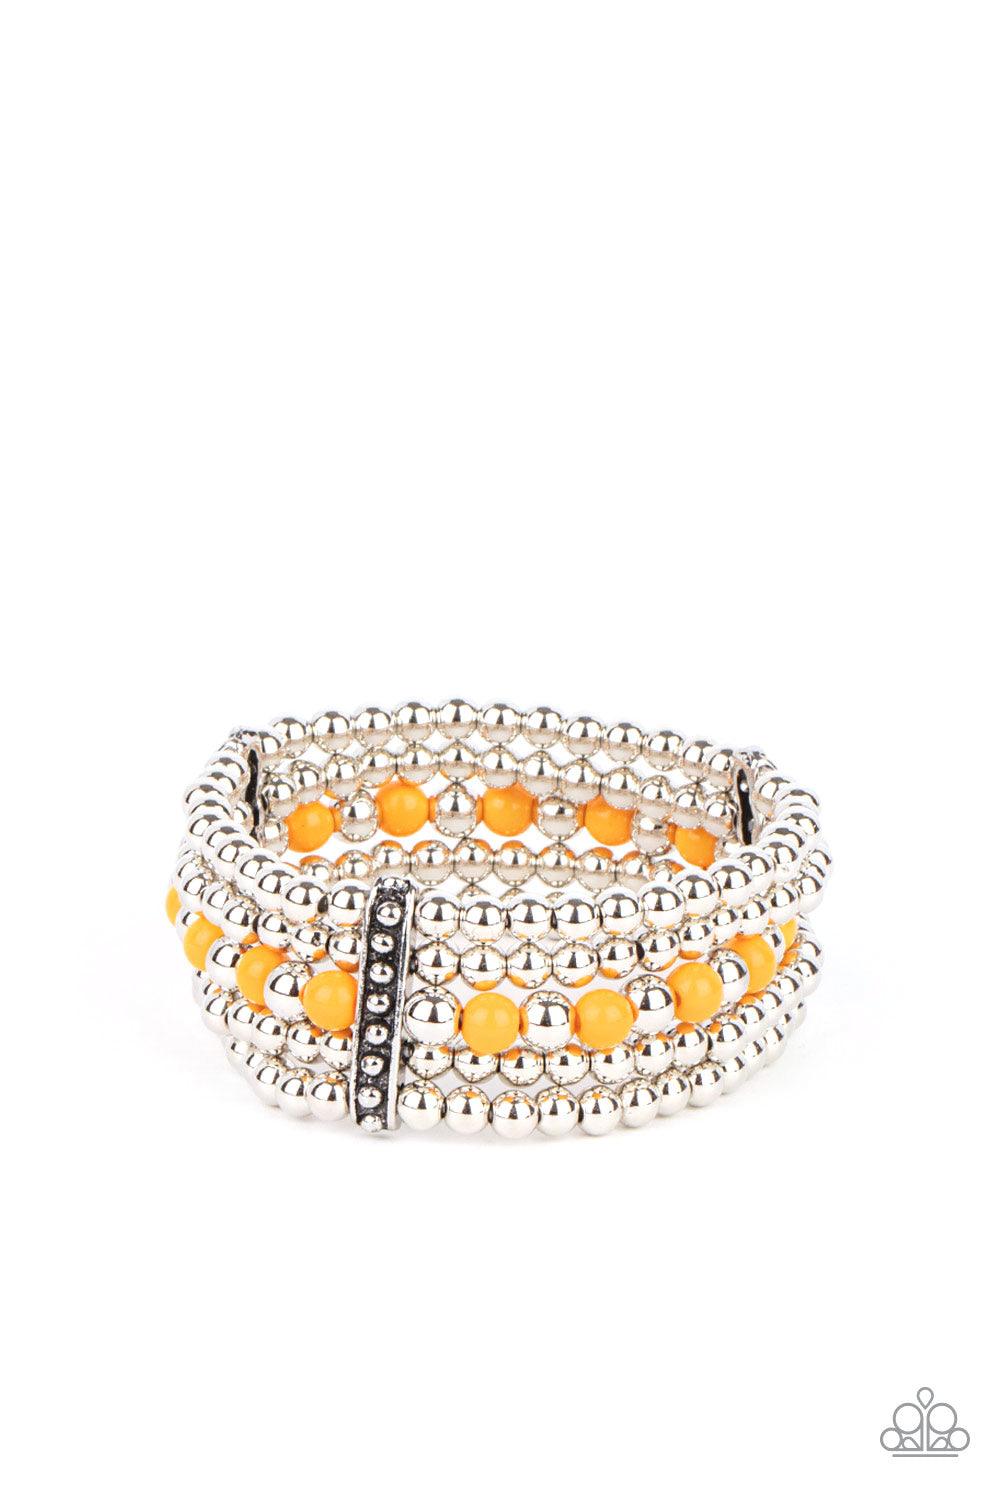 Paparazzi Accessories Gloss Over The Details - Orange Held together by studded silver frames, rows of silver and Marigold beads are threaded along stretchy bands around the wrist, creating vivacious layers. Sold as one individual bracelet. Jewelry